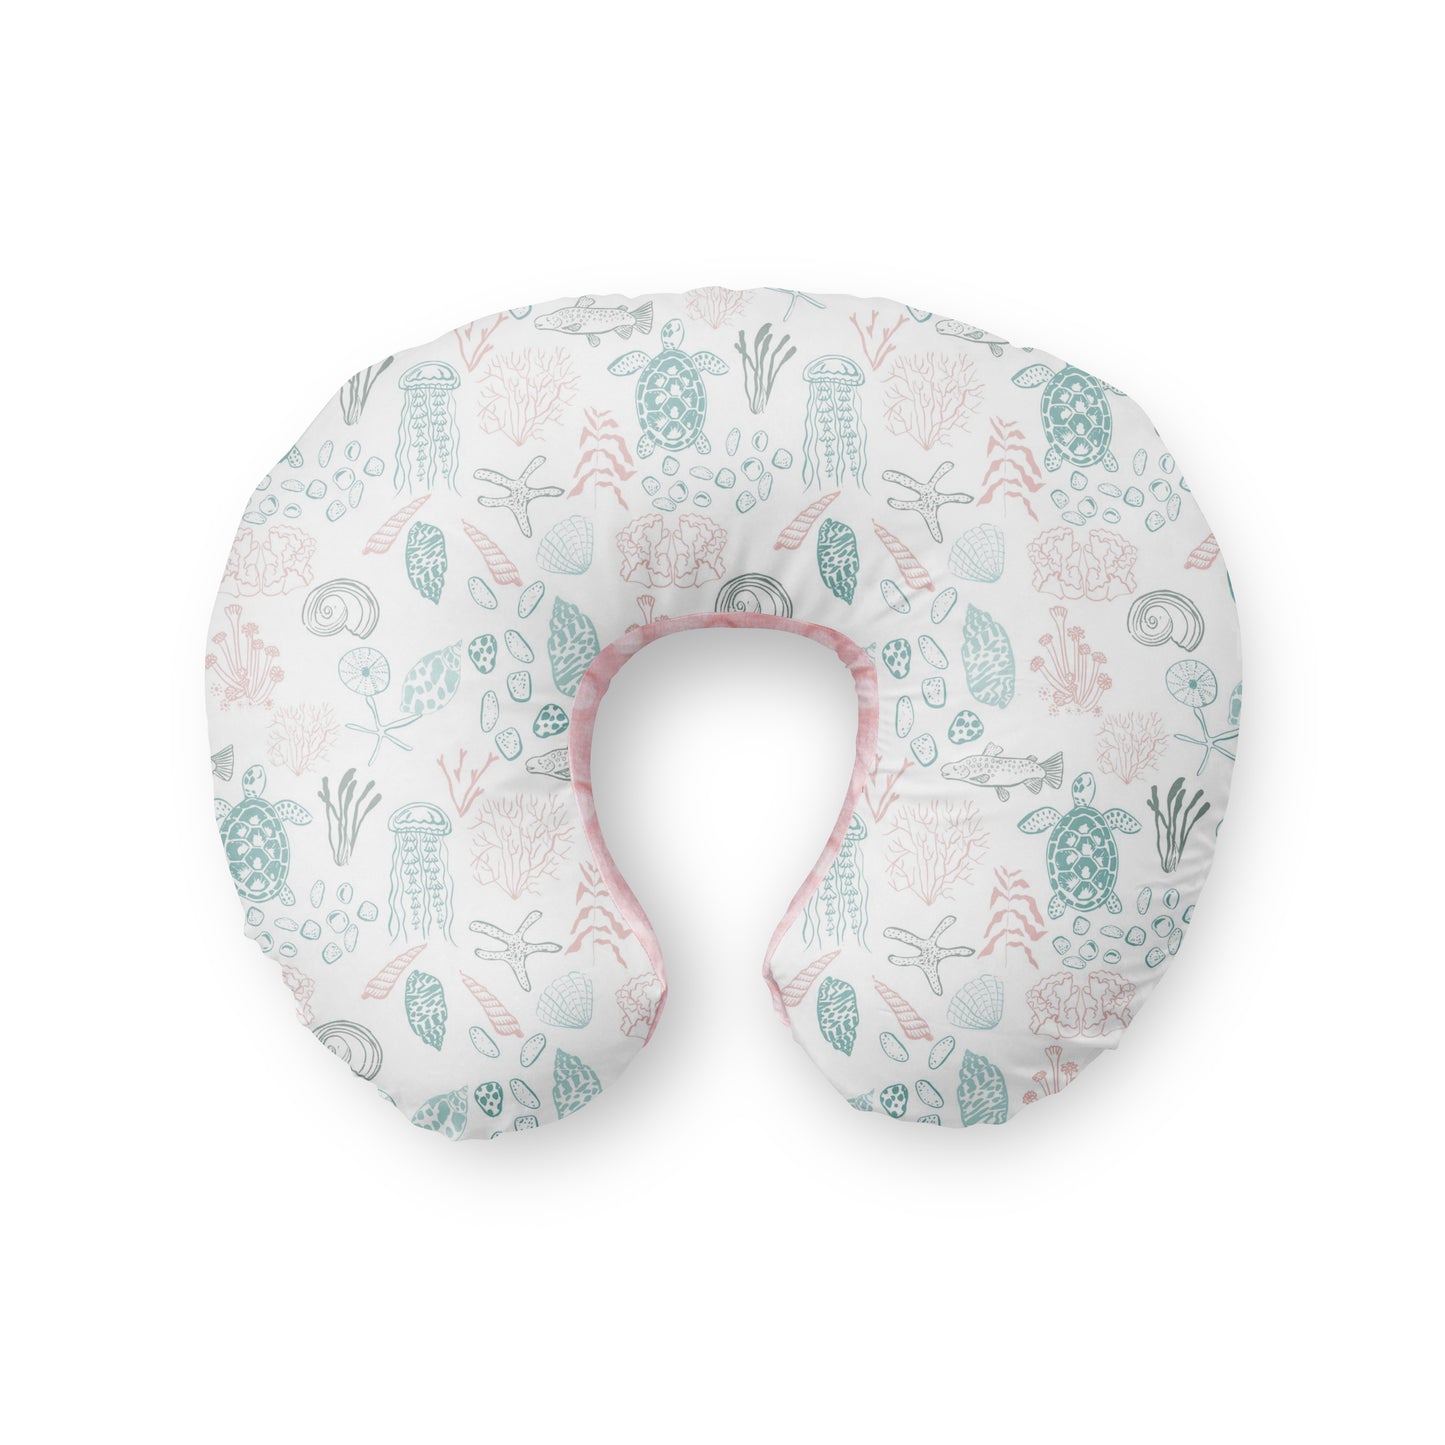 Nursing pillow cover. Under the Sea Turtle Coral and Mint baby nursery